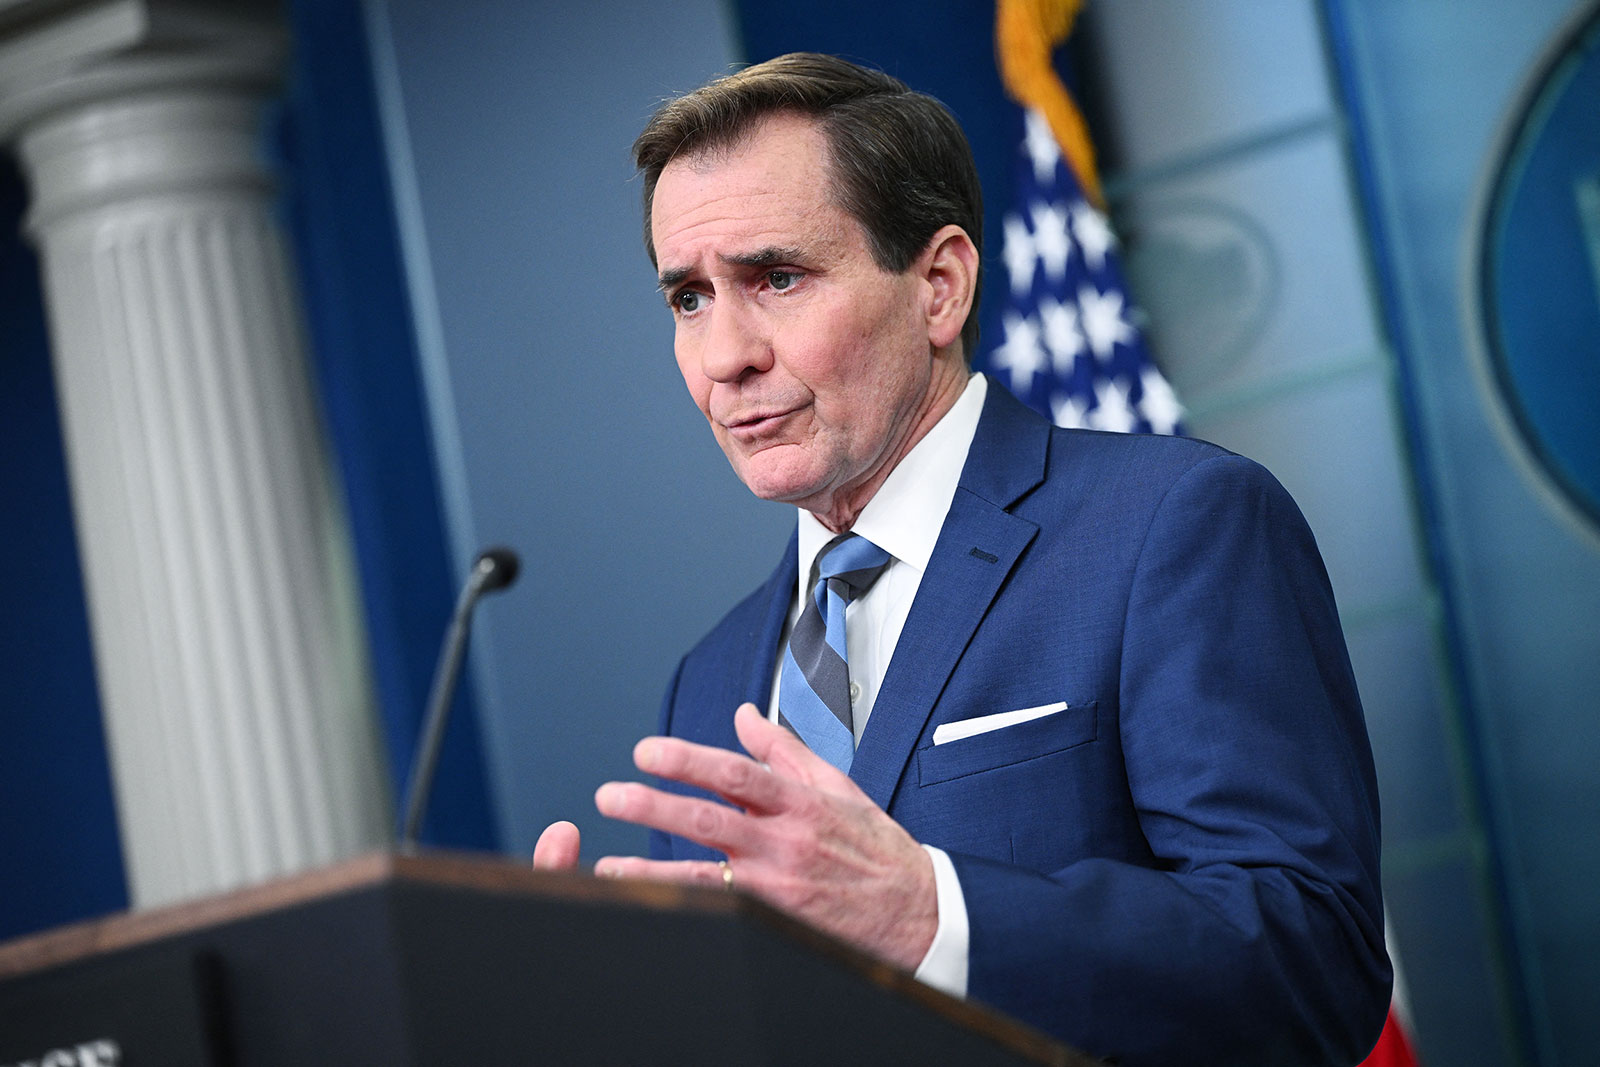 US National Security Councilspokesman John Kirby speaks during the daily briefing at the White House in Washington, DC, on Wednesday, January 31.